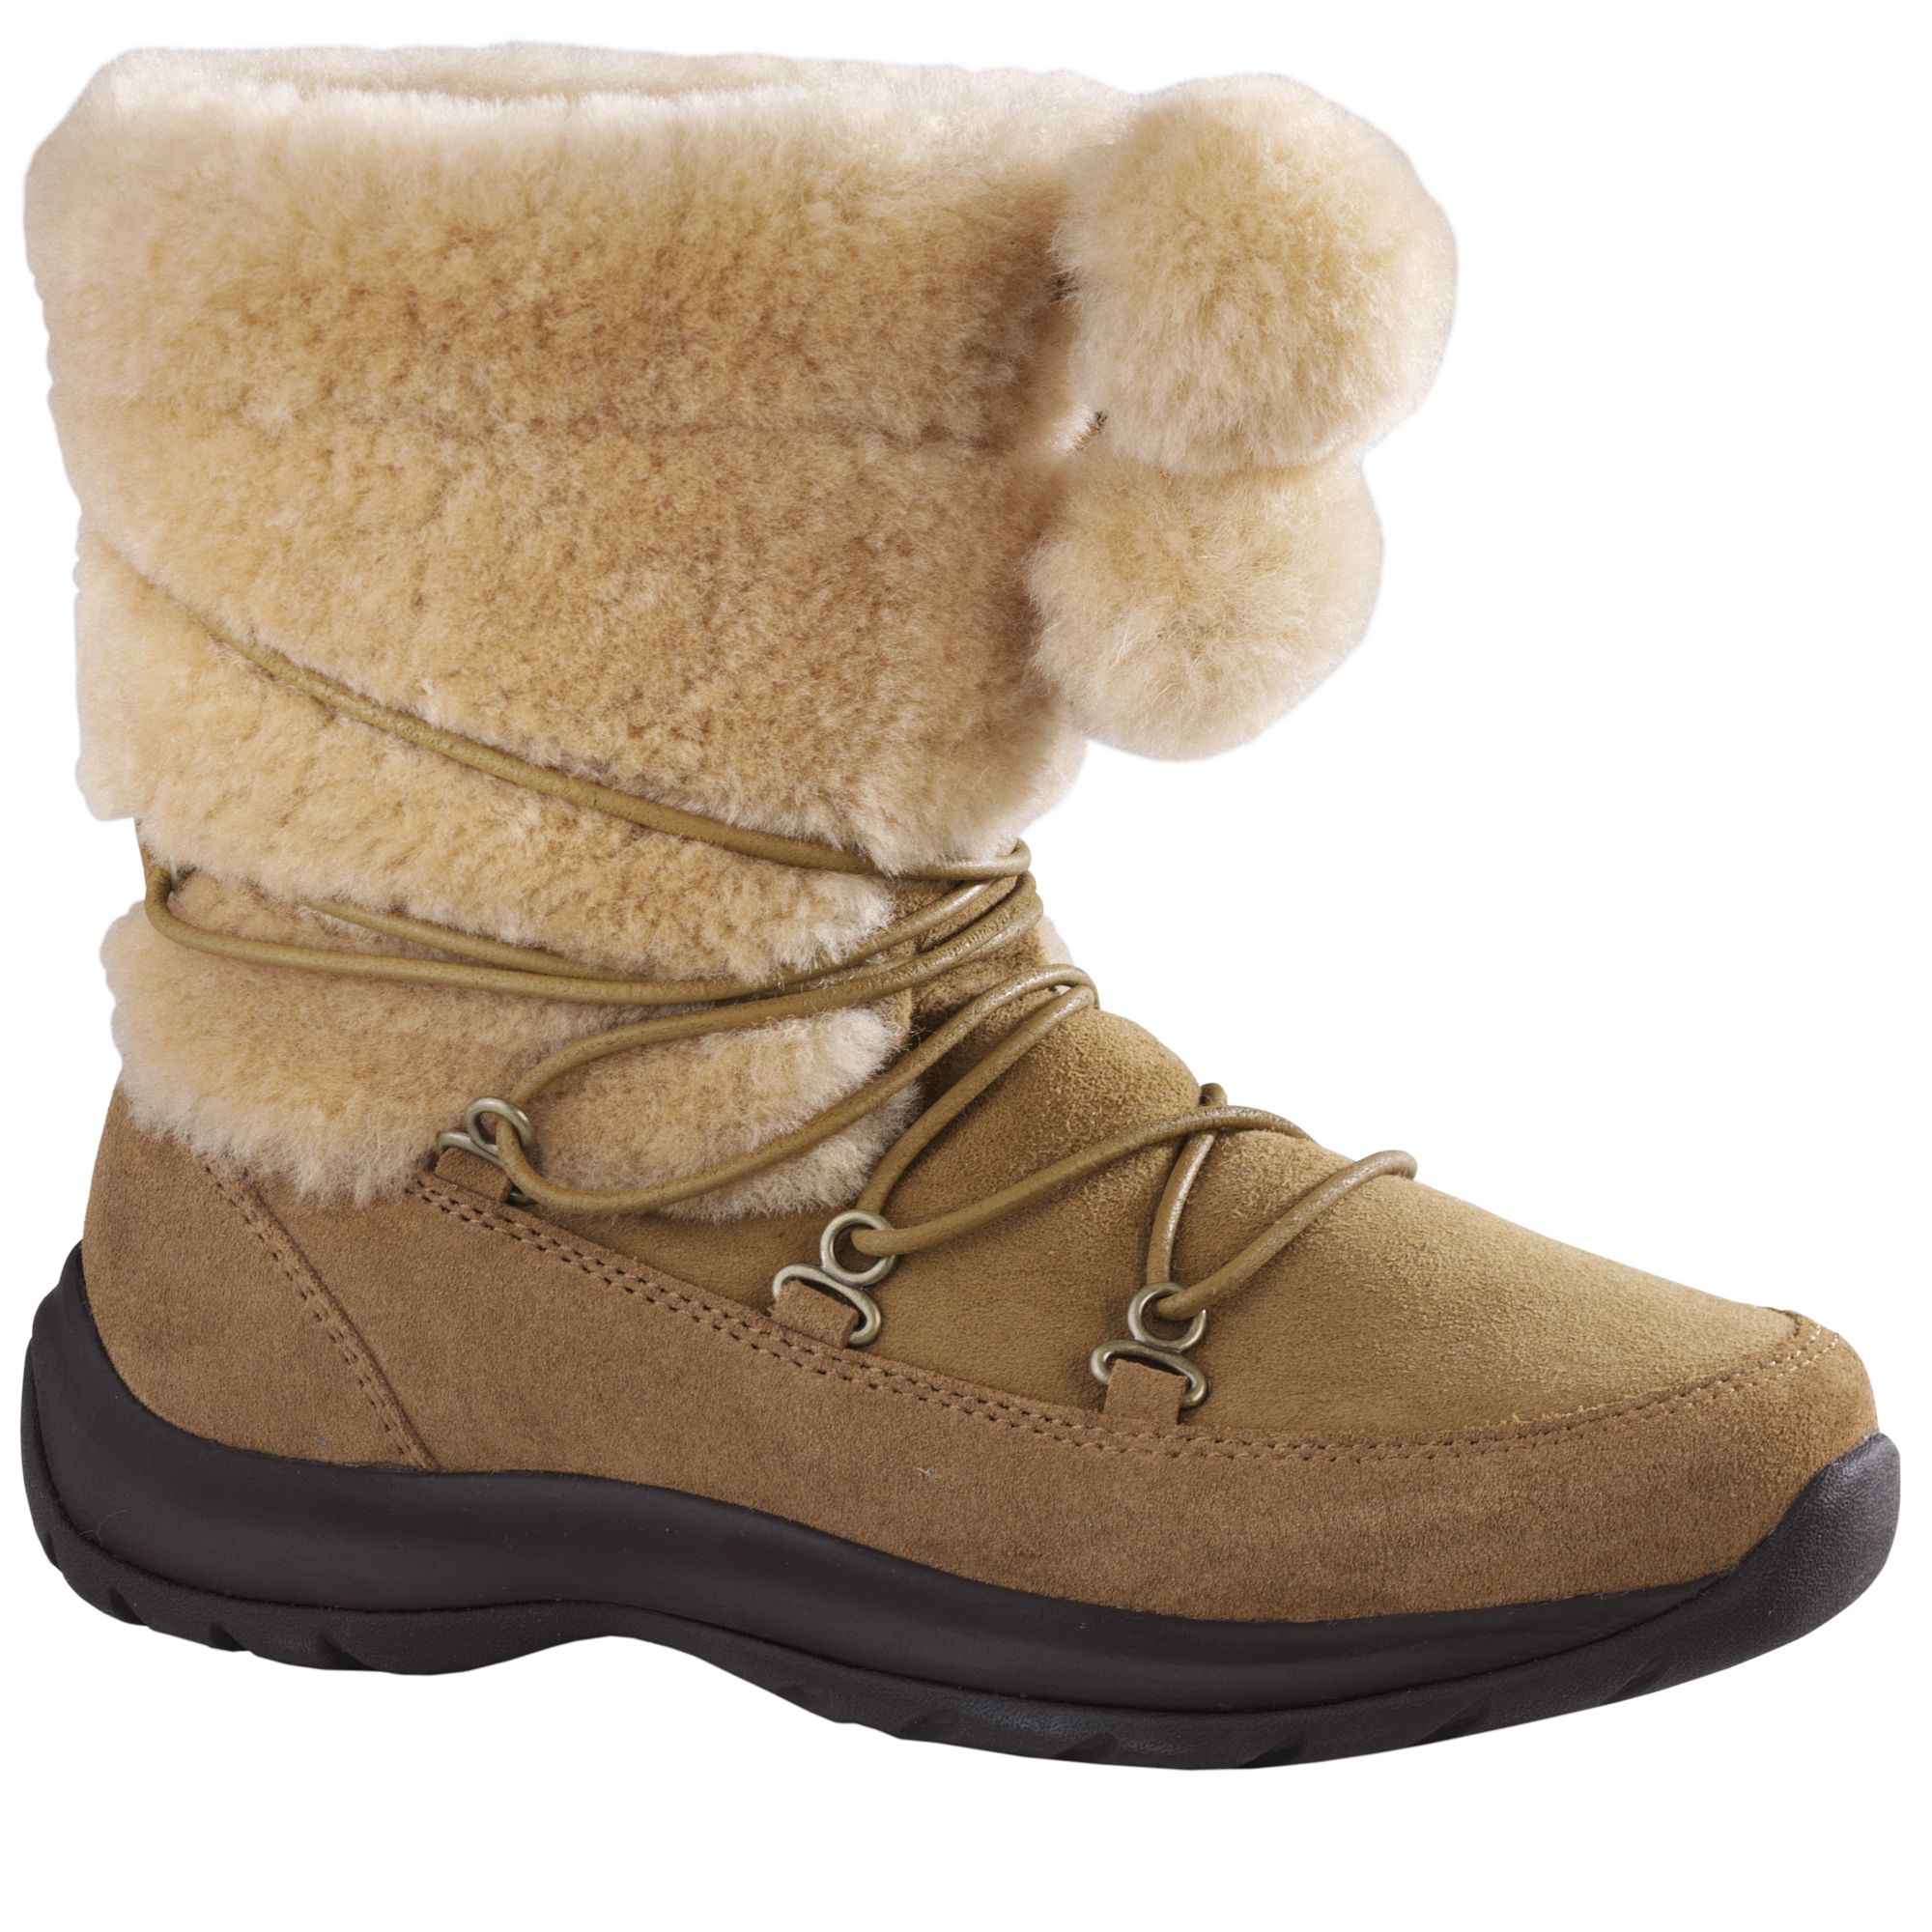 Lands' End Womens Regular Shearling Boots with Pom